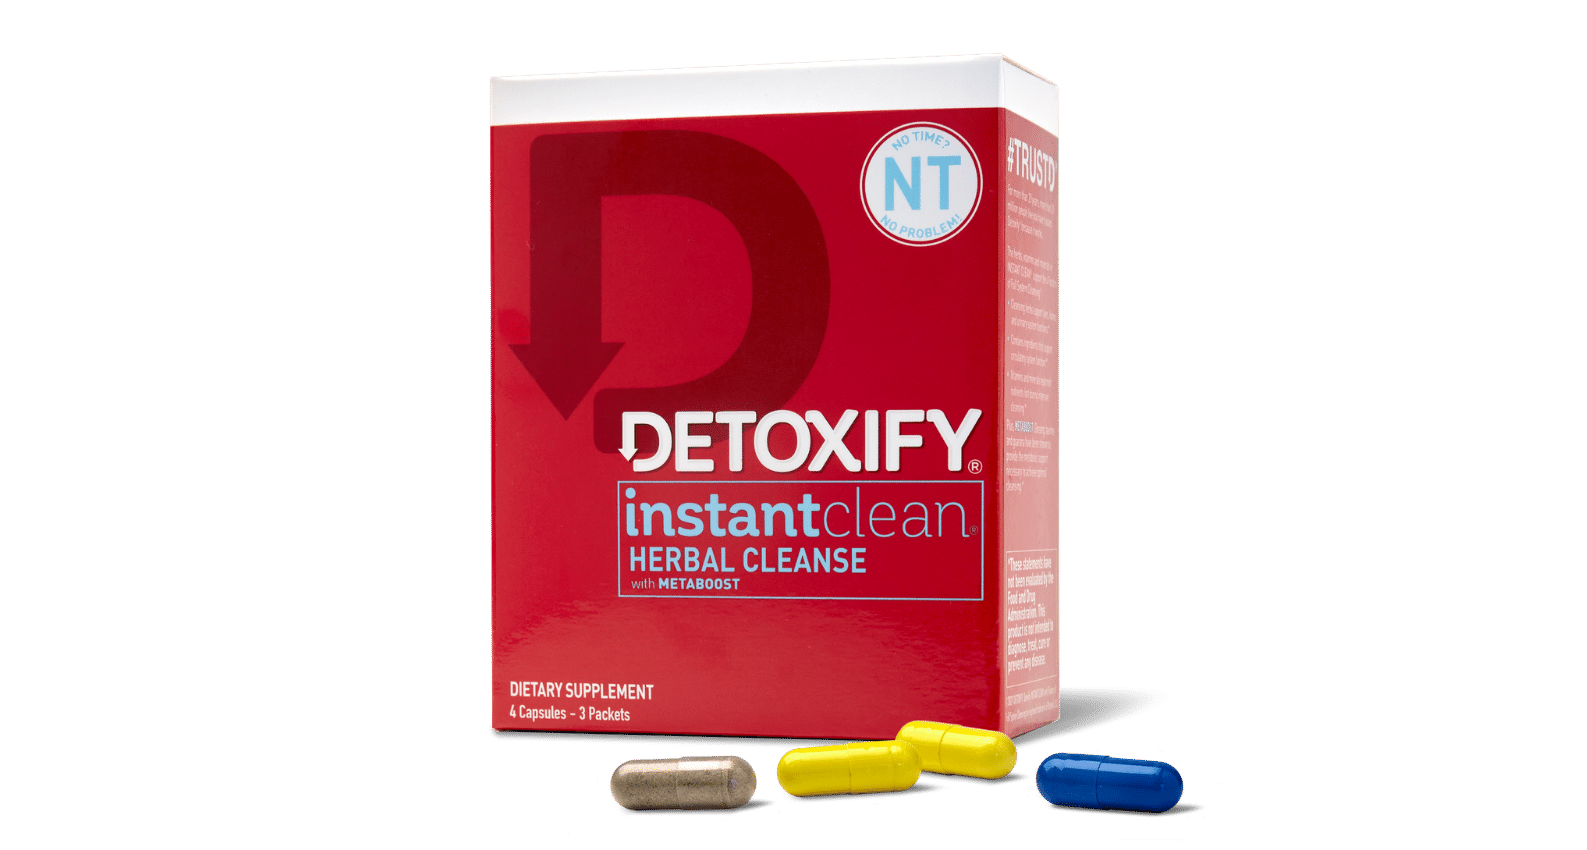 Detoxify Instant Clean harnesses the cleansing power of our one-day herbal cleansing drinks in four, sugar-free capsules. 